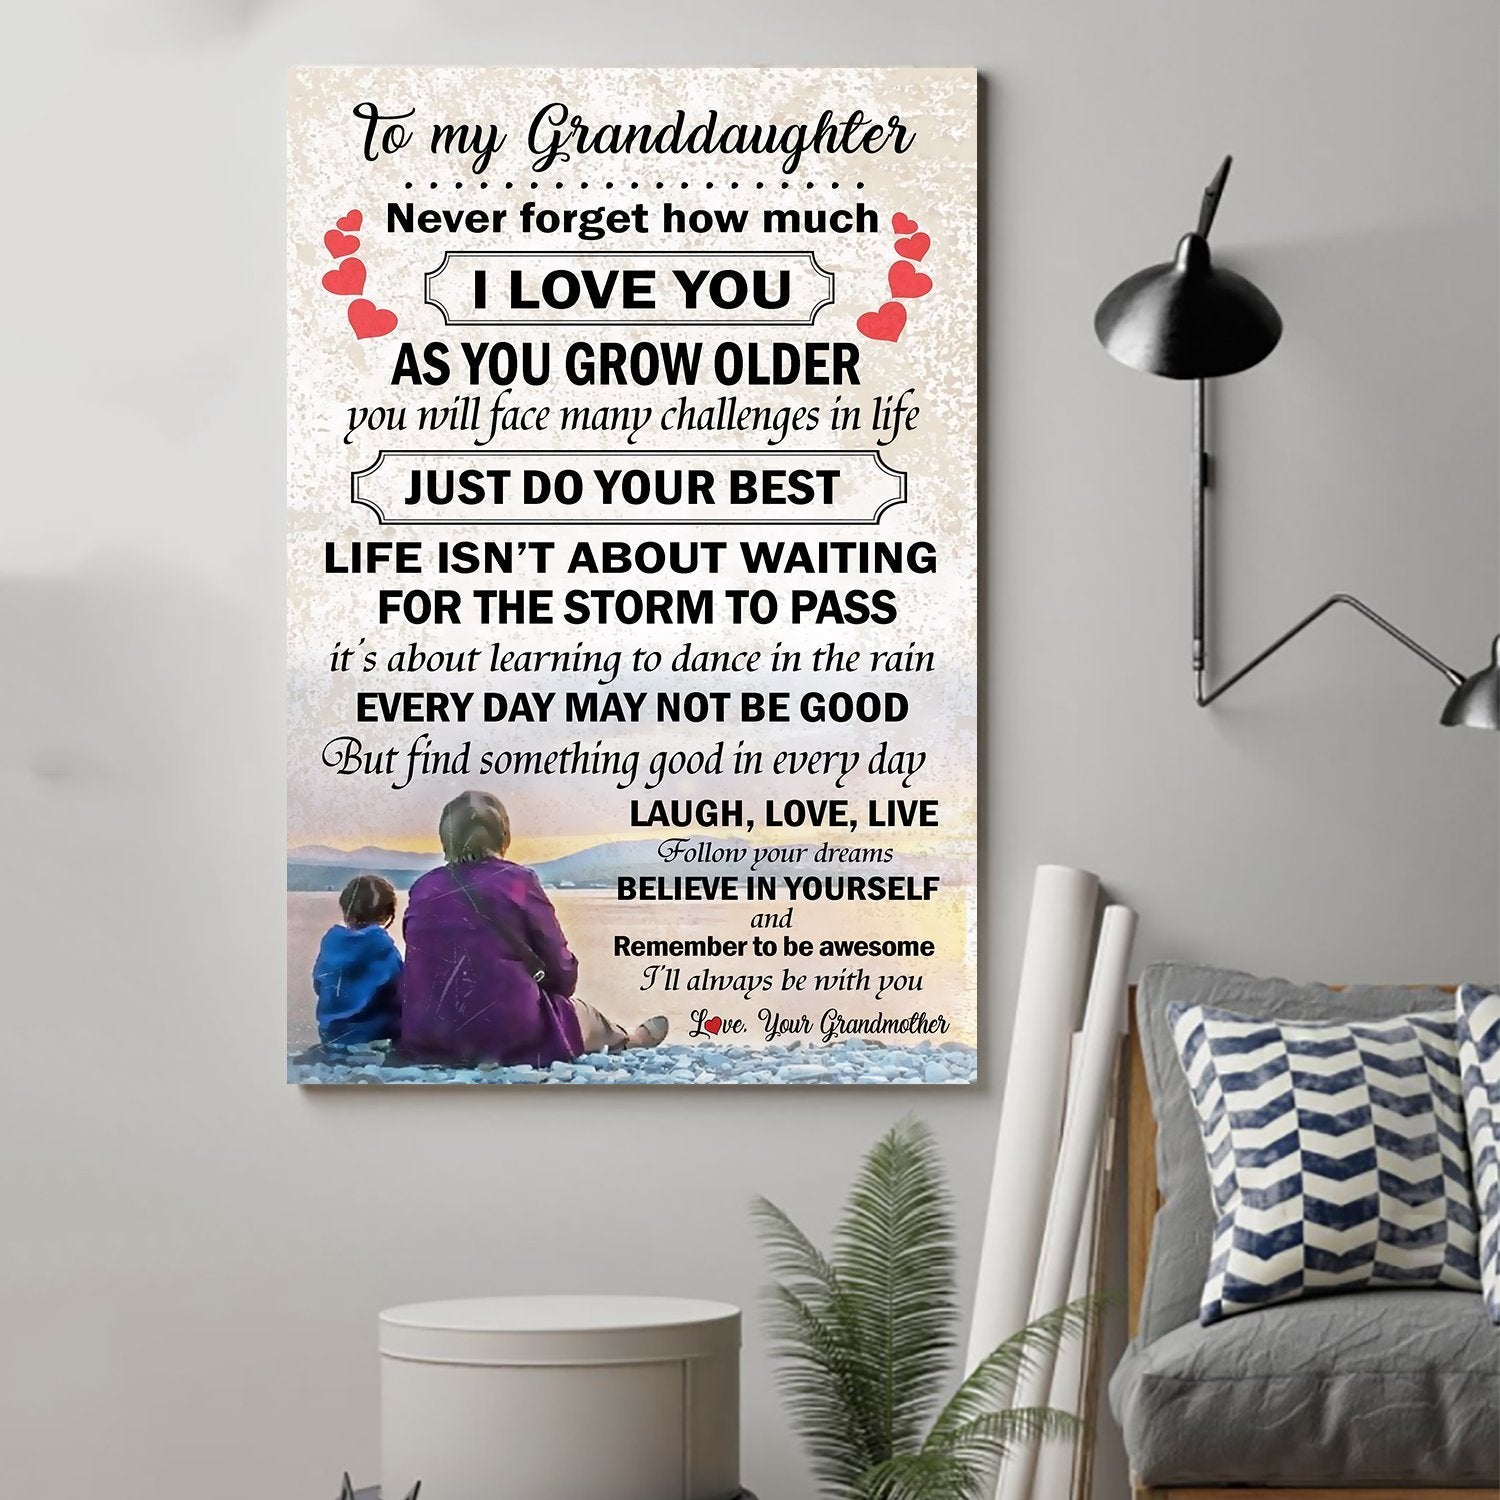 Family Canvas and Poster ��� Grandmother to granddaughter ��� Laugh, love, live vs5 wall decor visual art - GIFTCUSTOM